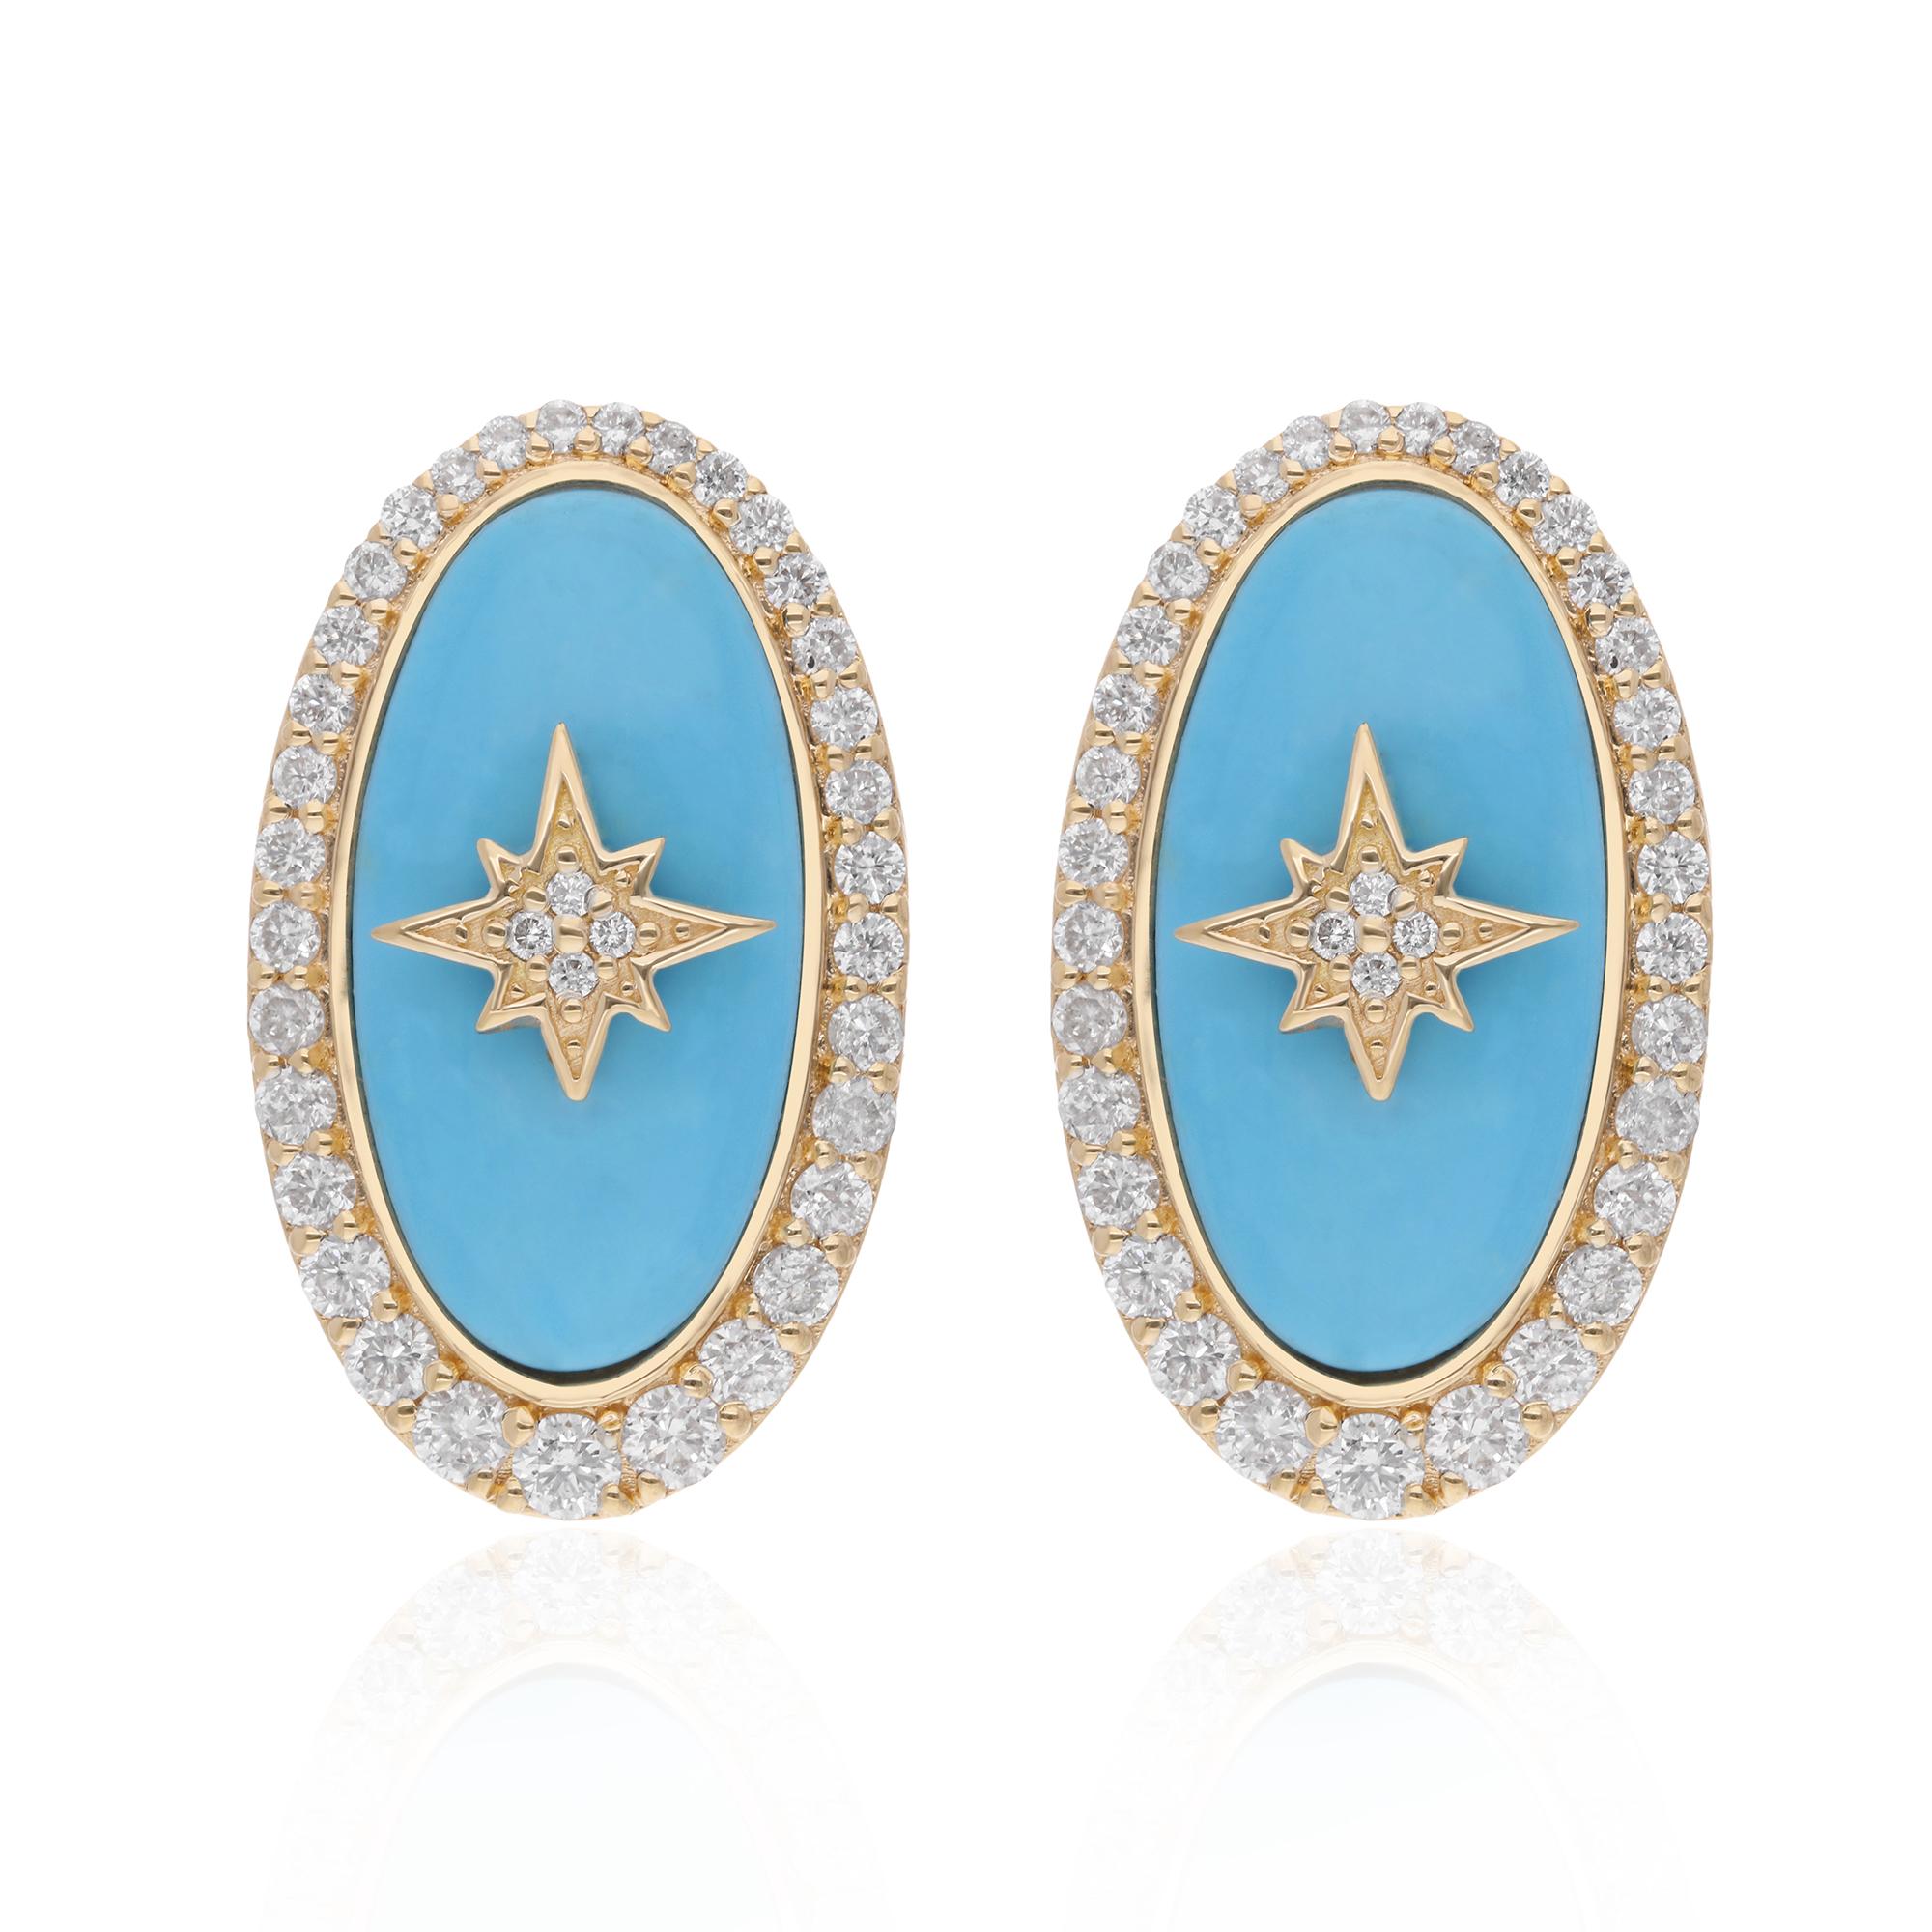 Step into a world of celestial elegance with these Natural Oval Turquoise Starburst Earrings, accented with diamonds and meticulously crafted in 18 karat yellow gold. Each earring is a masterpiece of fine jewelry, designed to capture the beauty of